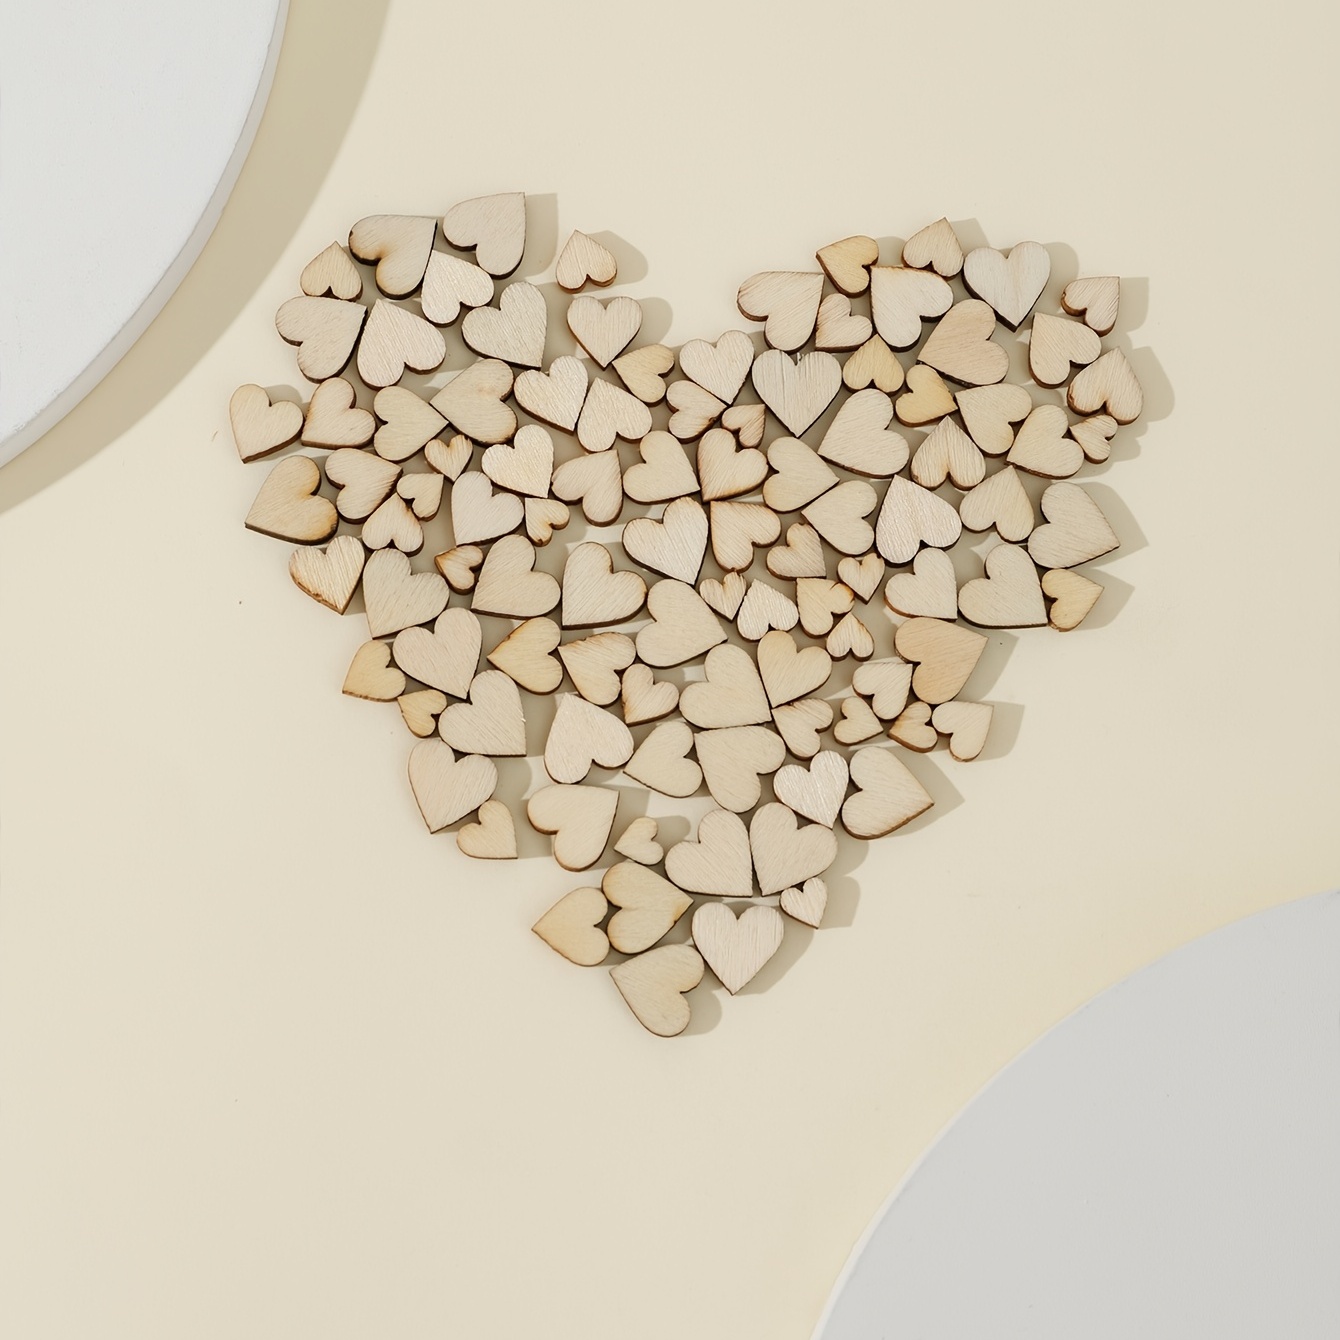 Qunclay 40 Pcs Wooden Hearts with Magnets 3.15 Inch Unfinished Blank Heart  Small Wooden Hearts DIY Decor Wood Slices Tags Card Decorations for Crafts